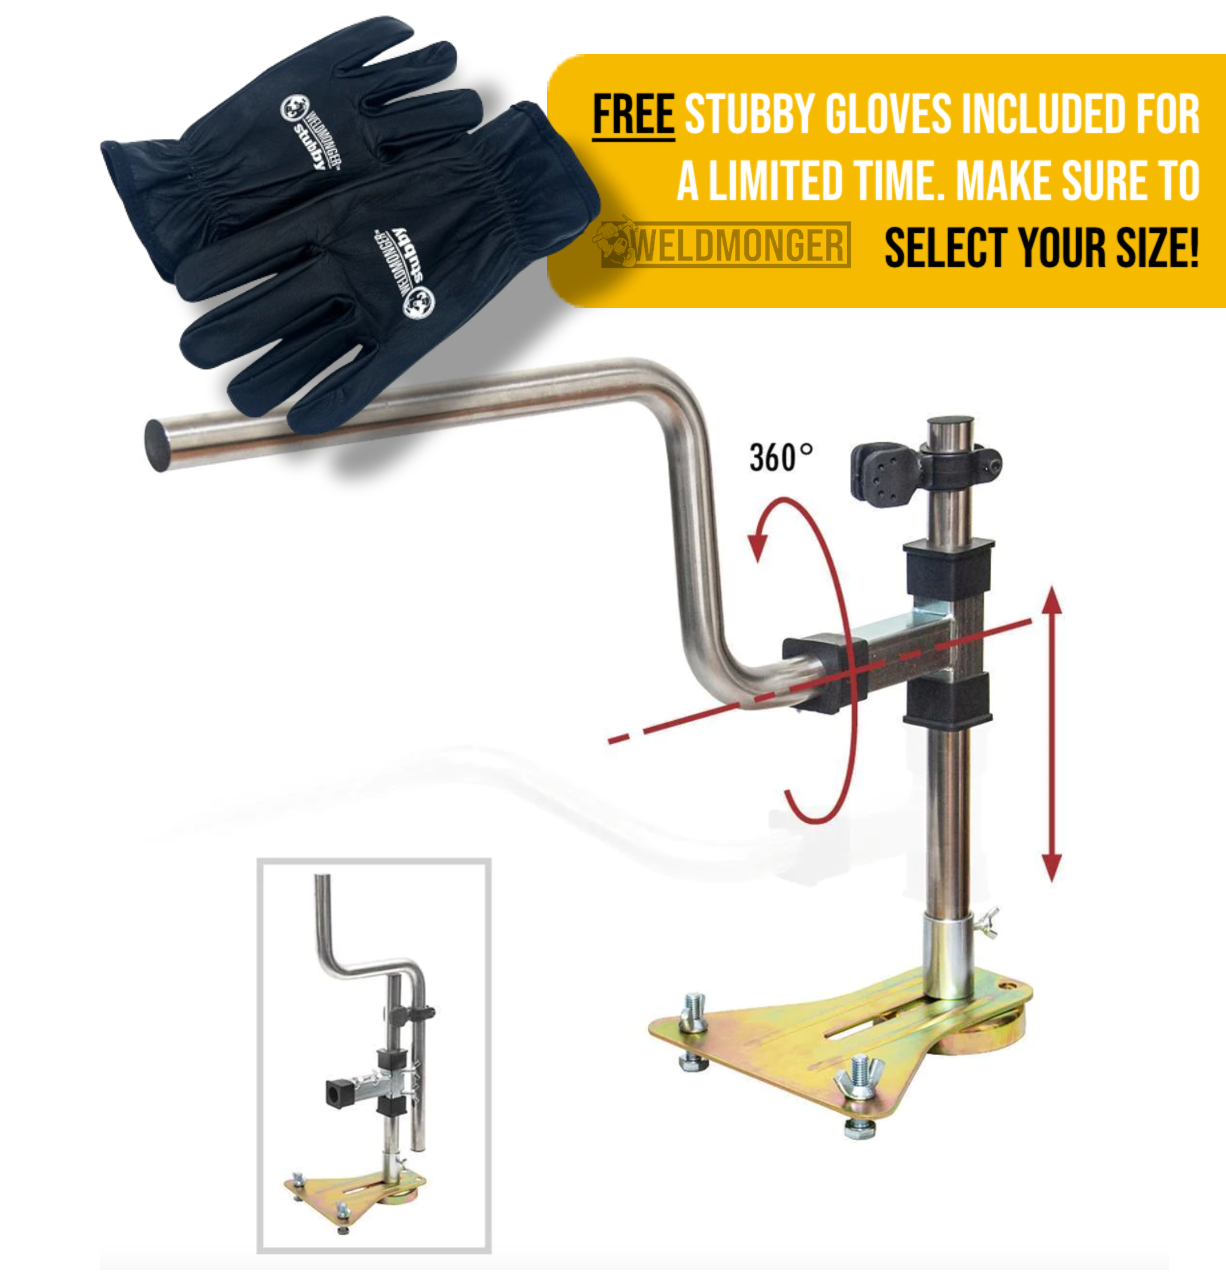 STRONG HAND TOOLS - ADJUSTABLE WRIST REST - ARW16, WELDMONGER® TIG WELDING GLOVES - BLACK "STUBBY®" Included for Free